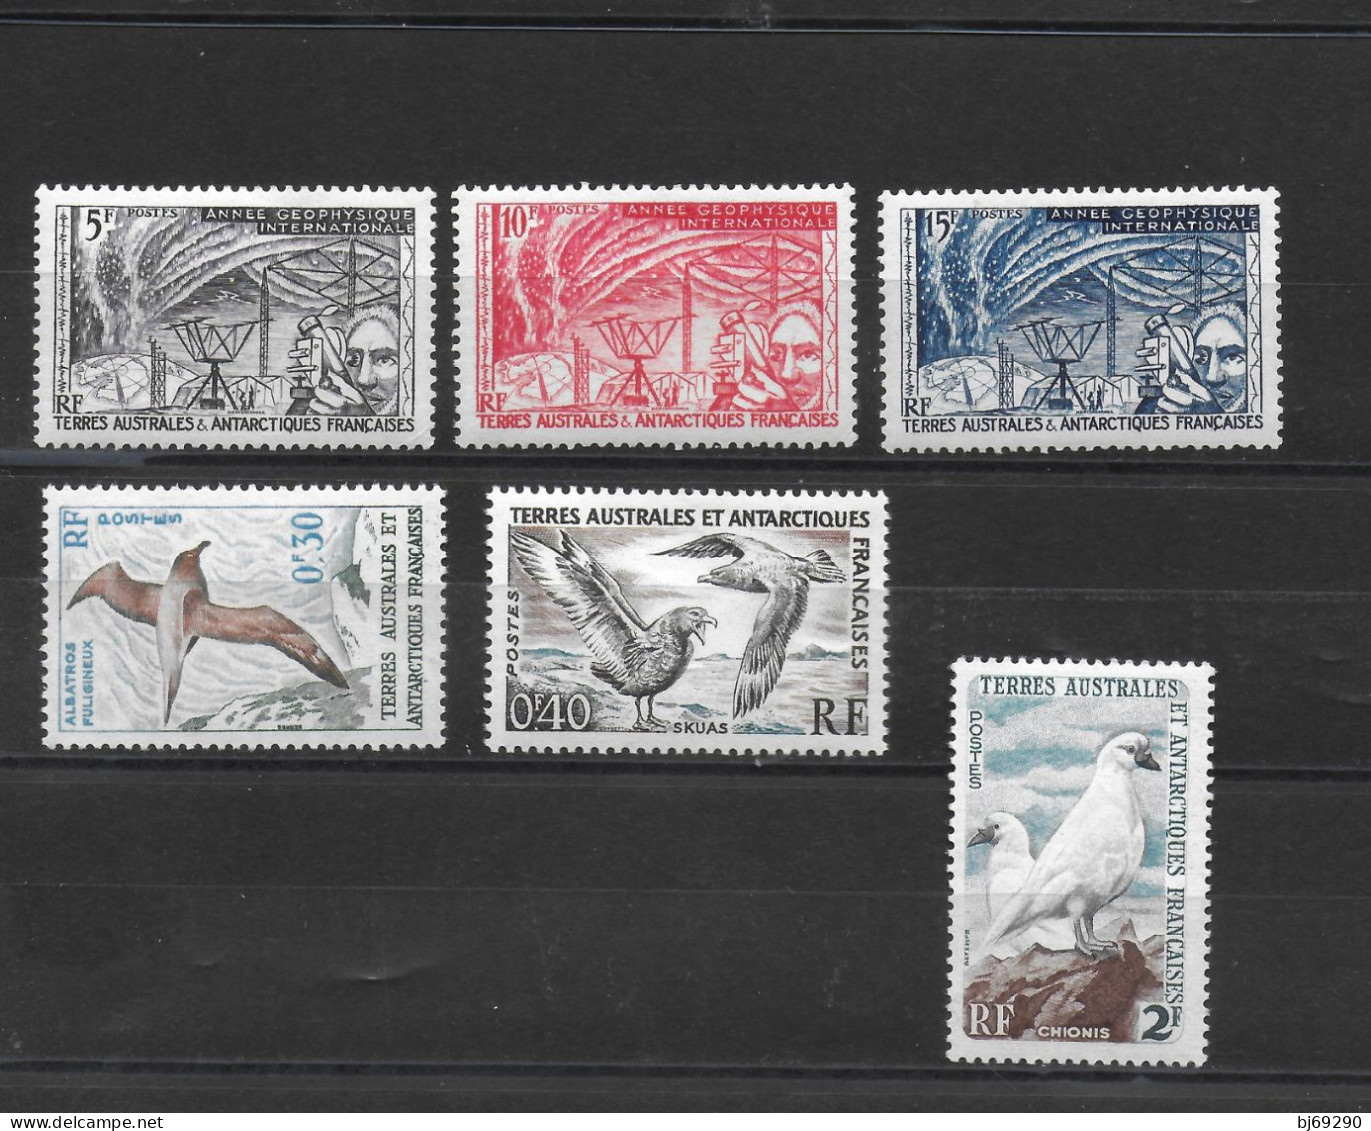 TAAF - Timbres 8-9-10 (1957) -12-13 (1958) -13A (1960) Neufs ** - Unused Stamps